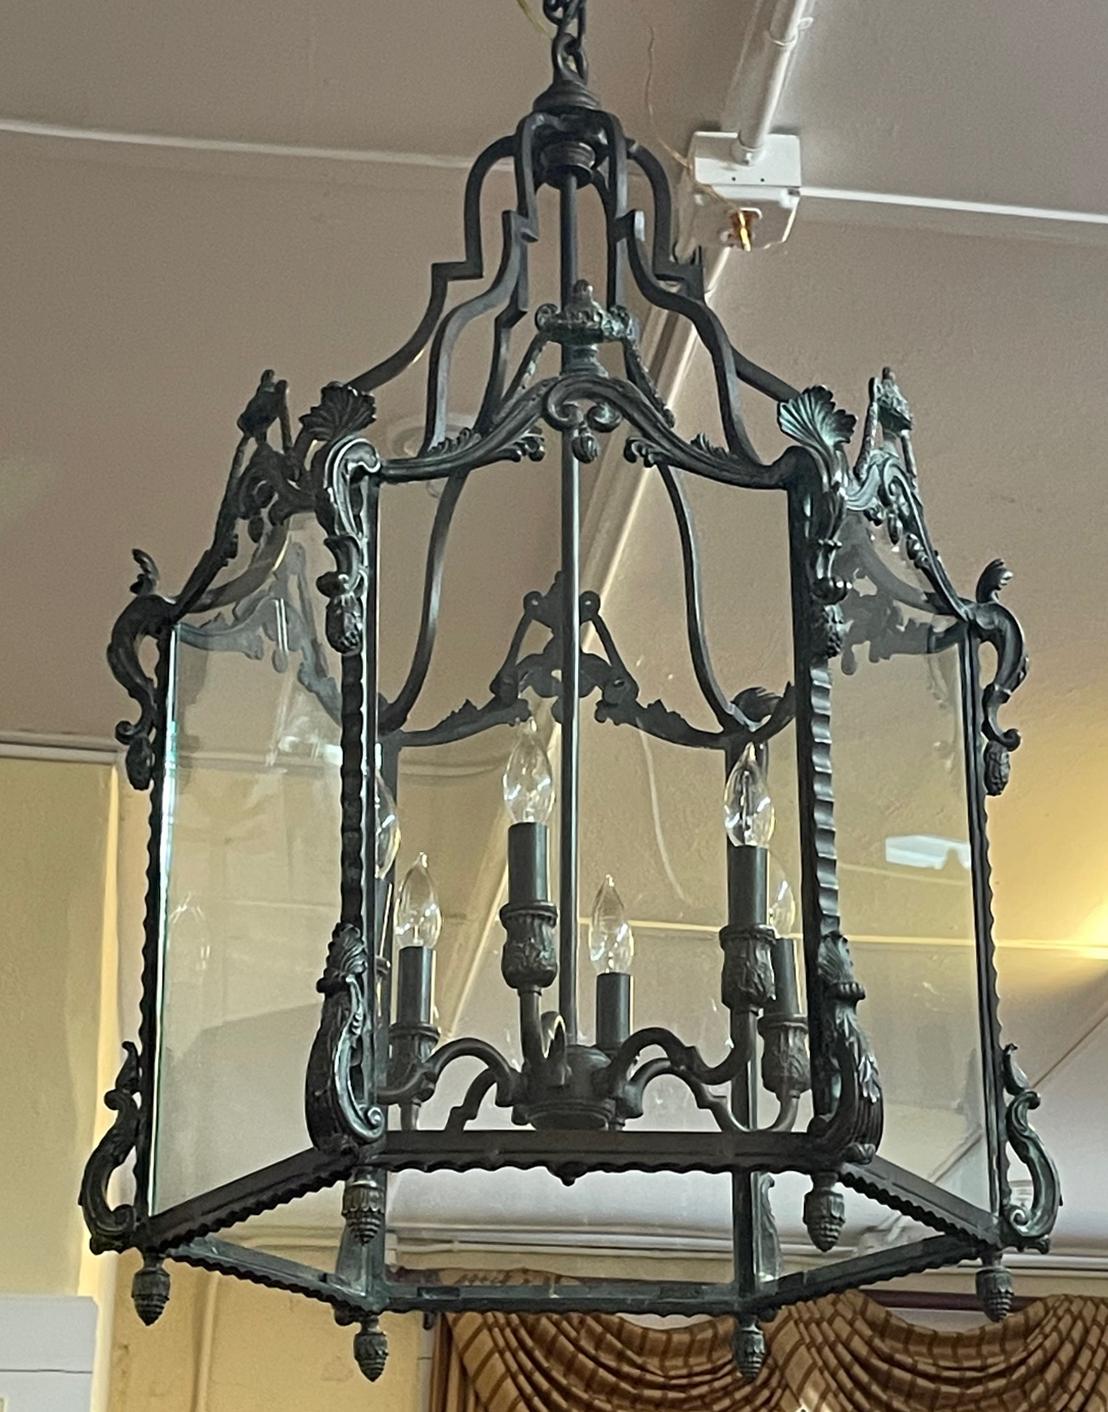 Gorgeous High Quality Bronze Patina 6 Light Chandelier Lantern 38 X 24 X 24

Dimensions : 38 X 24 X 24

This lantern has a gorgeous bronze patina and is well cast! The lantern is in good vintage condition some scratches to the glass but are not